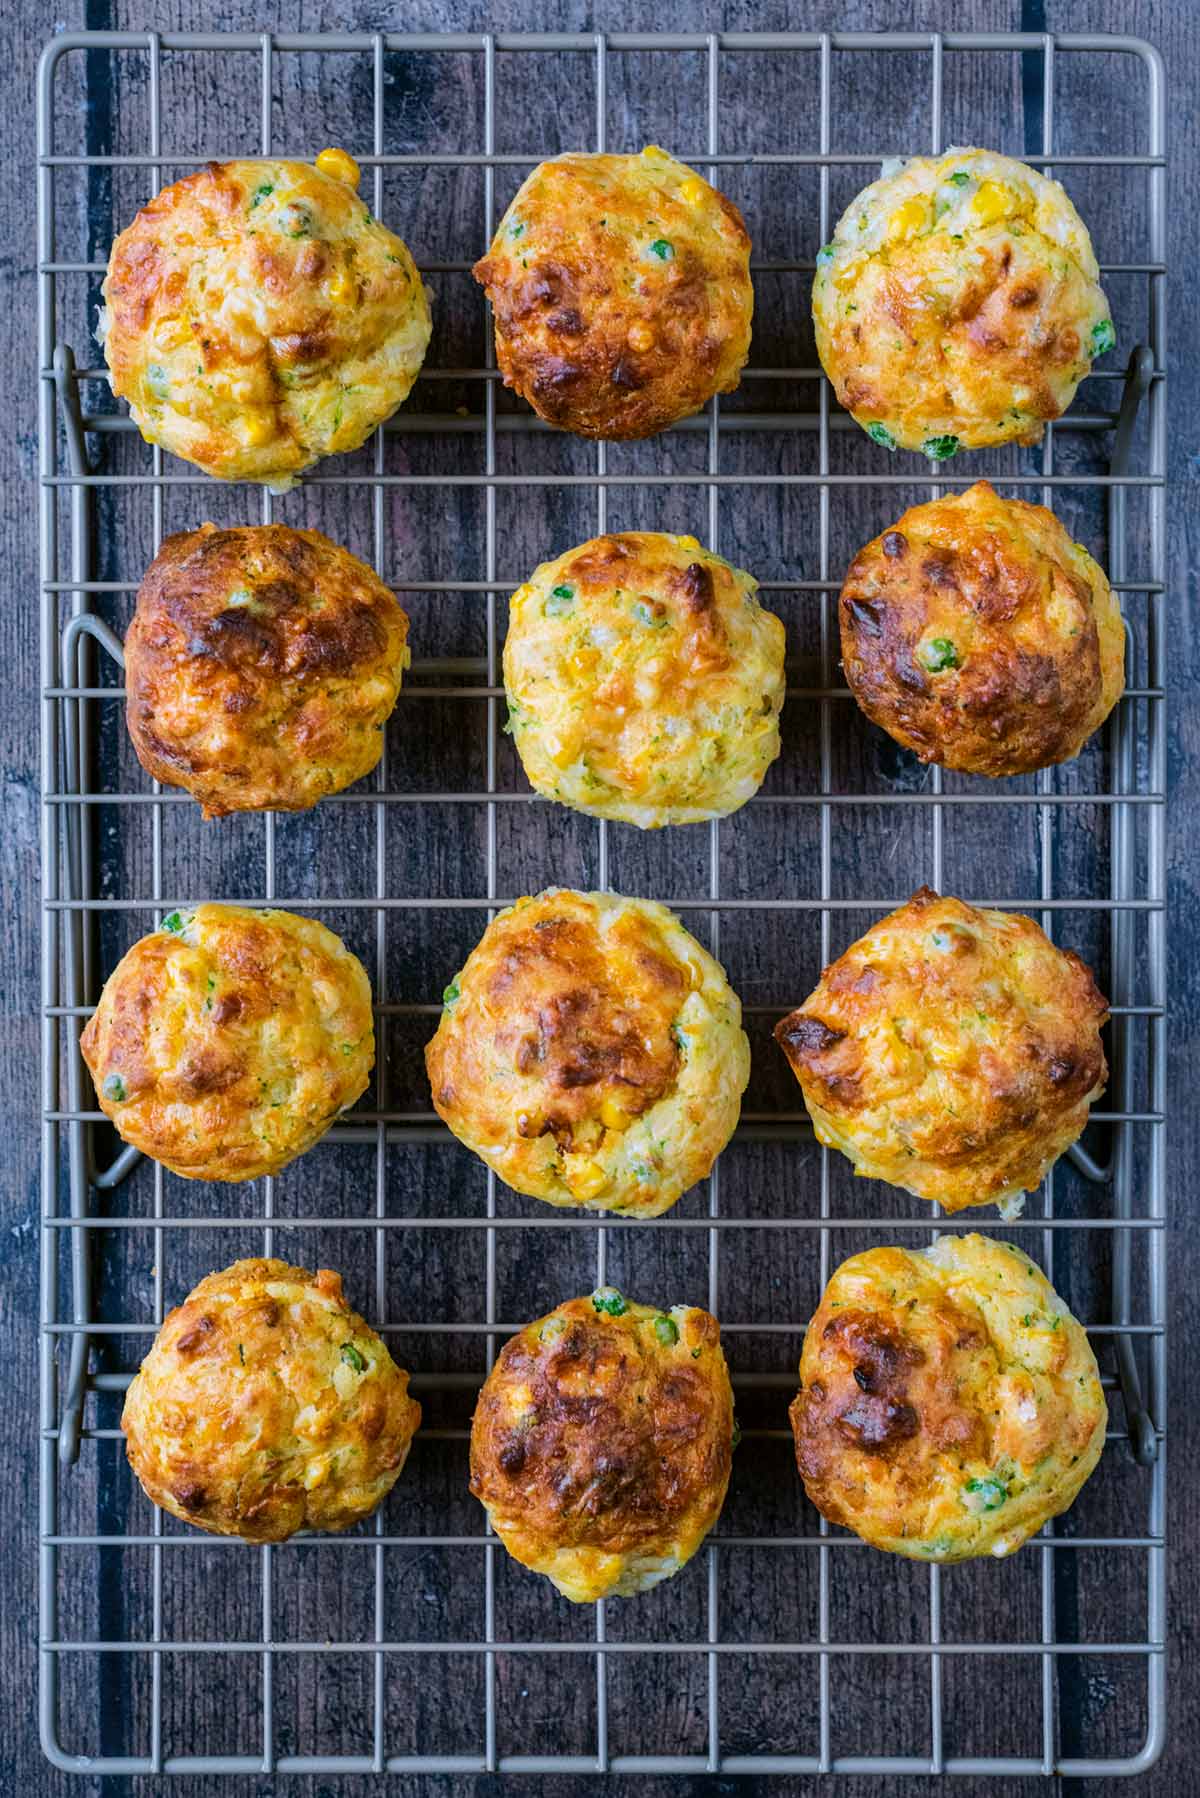 Twelve savoury muffins cooling on a wire rack.